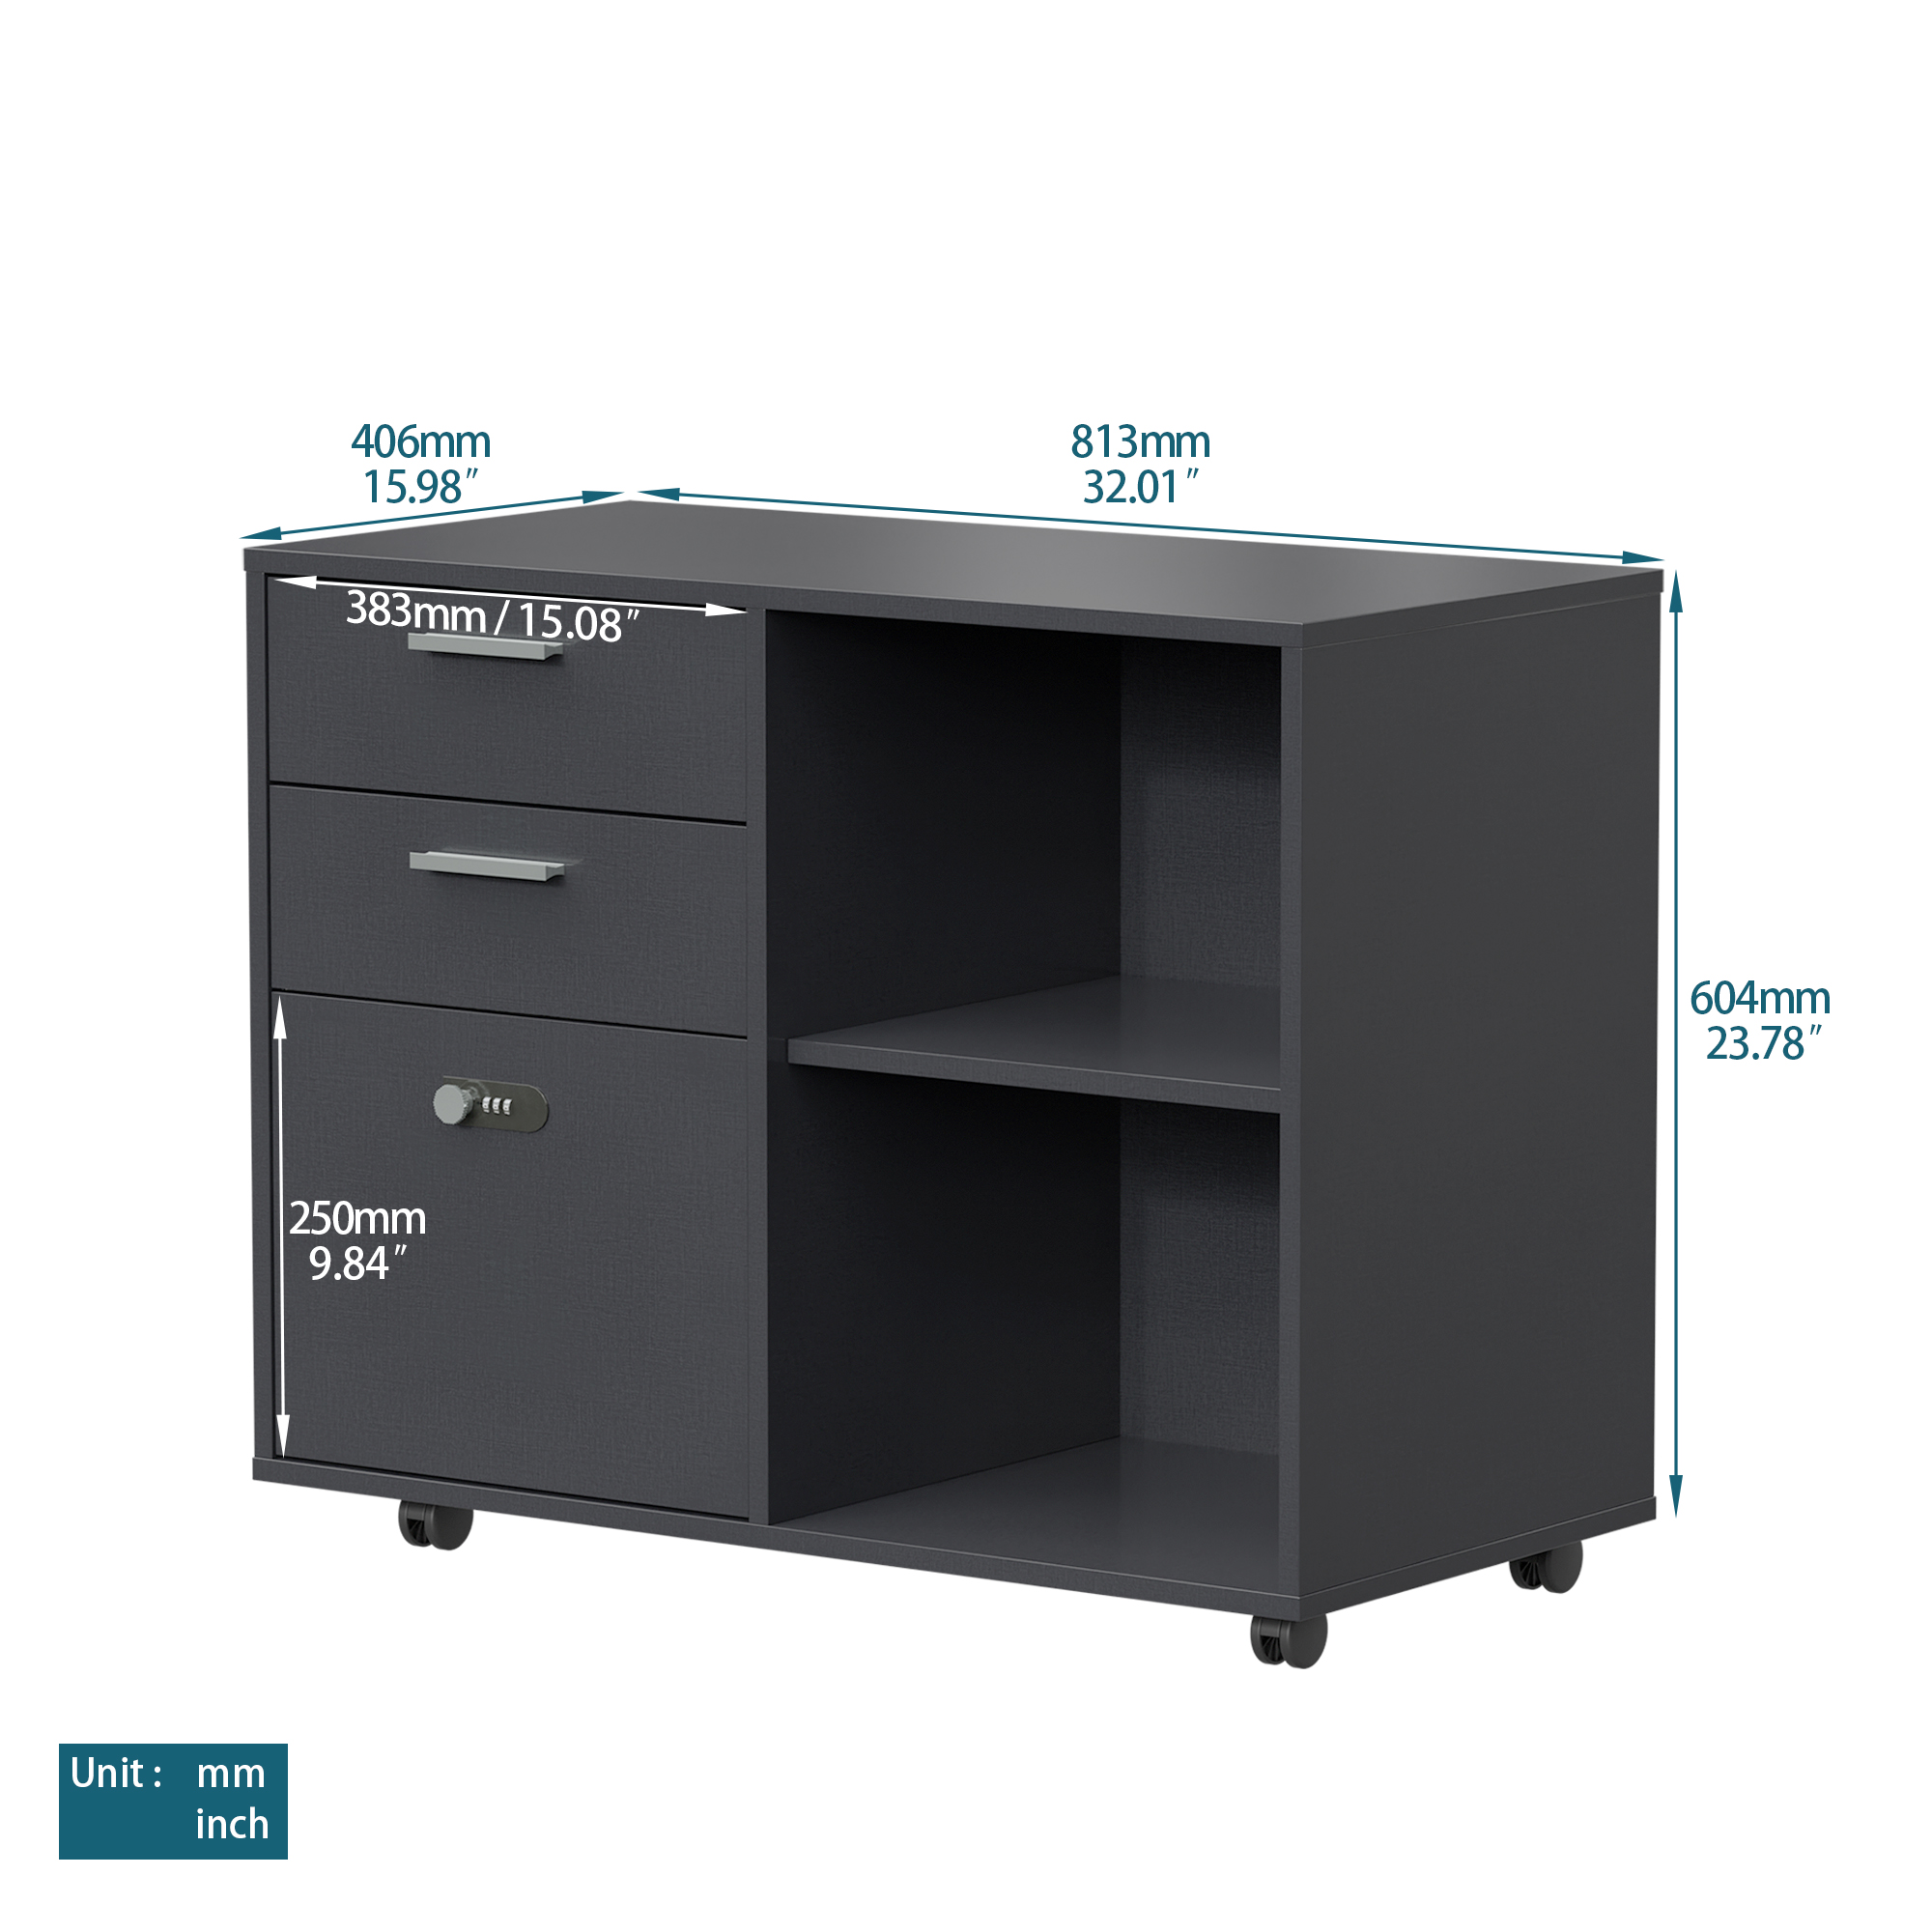 Wooden Home Office Pulley Movable File Cabinets with Password Lock, File Cabinet with Open Storage Shelves and Two Drawers, Low cabinet with 5 Universal Wheels, Easy to Assemble, Dark Gray - image 4 of 7